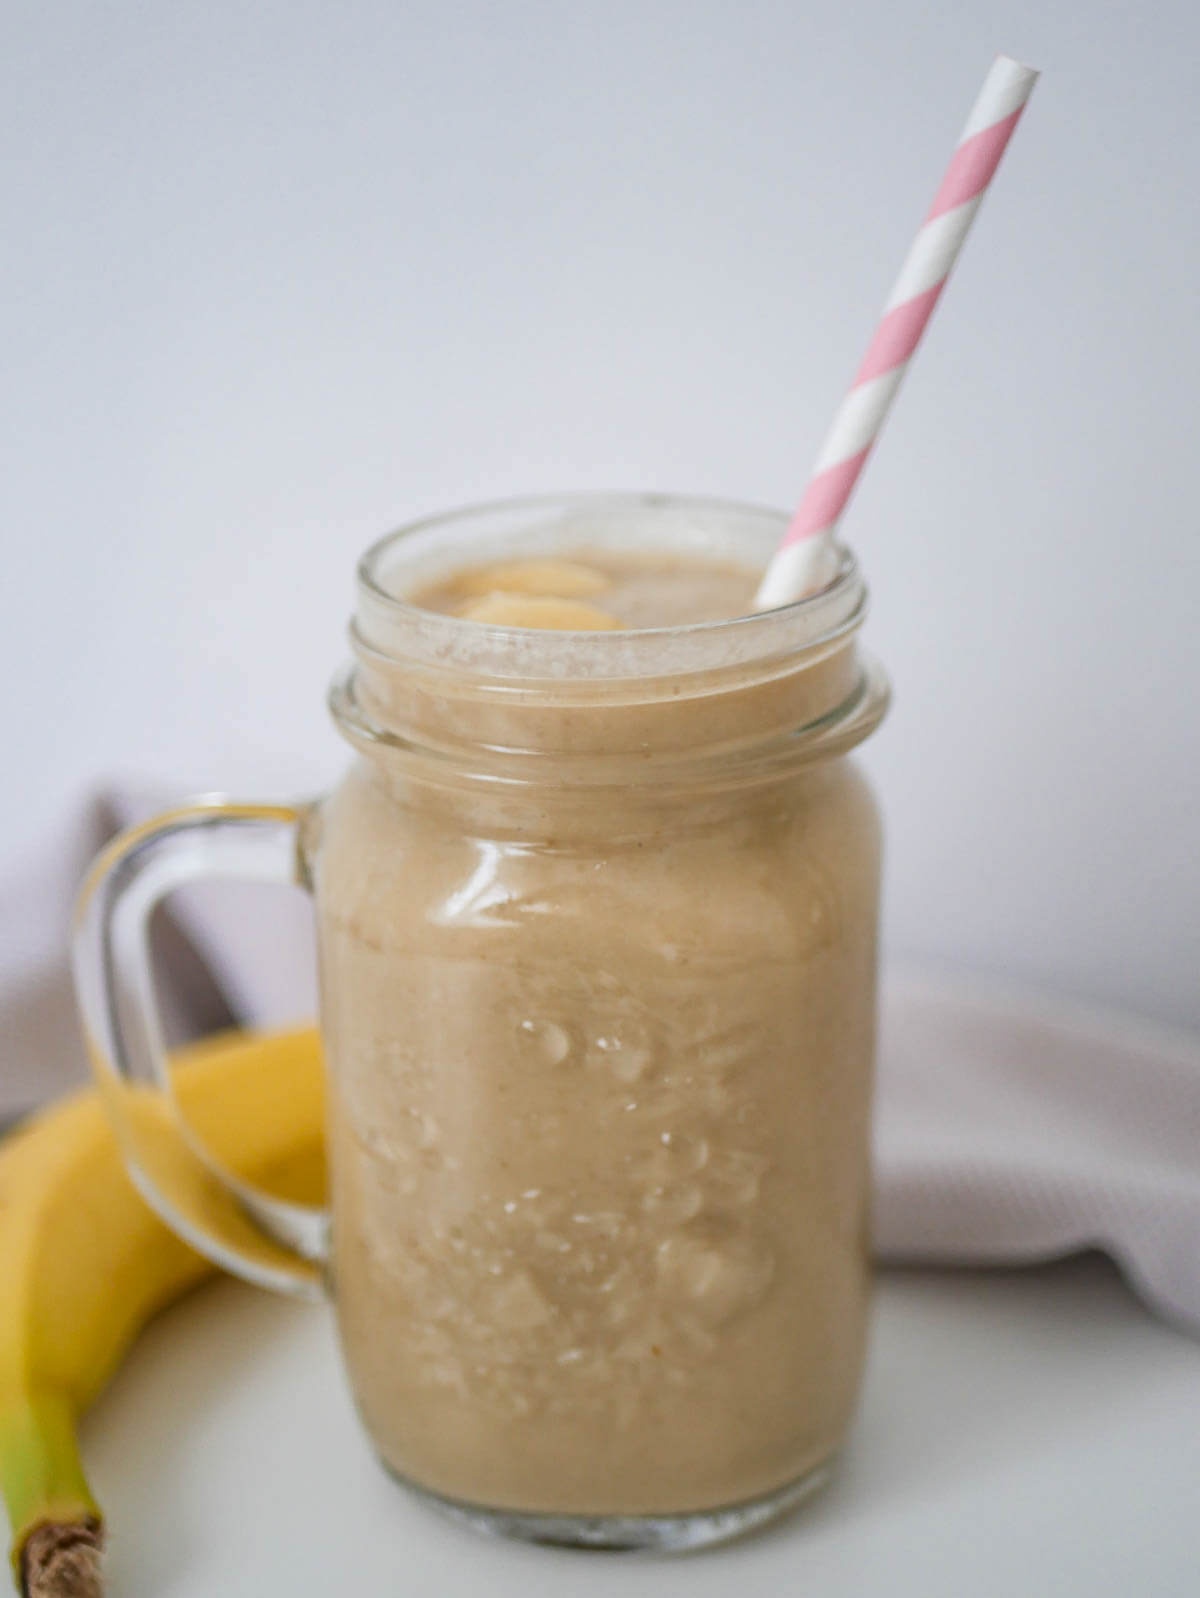 Apple Banana Smoothie with pink straw